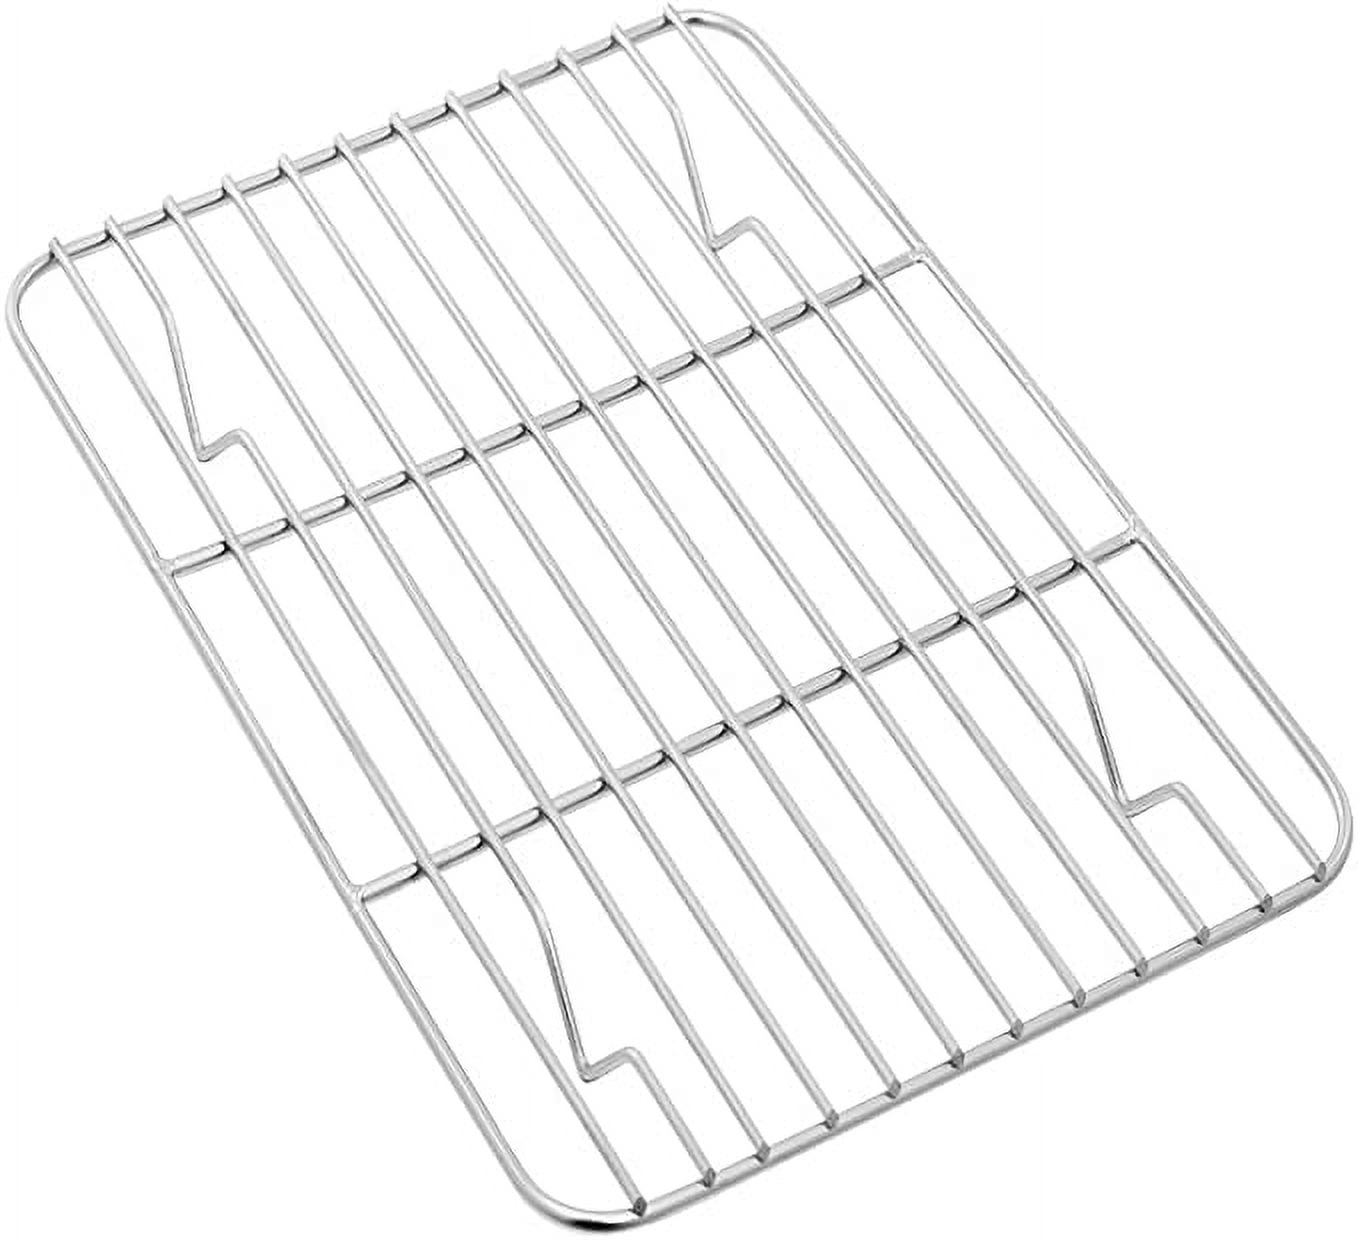  PriorityChef 18/8 Stainless Steel Cooling Rack, Heavy Duty Baking  Rack For Oven Cooking, Fits Half Sheet Pan, Wire Rack For Cooking, Bacon,  Cookie Cooling Rack, 11.5 x 16.5: Home & Kitchen